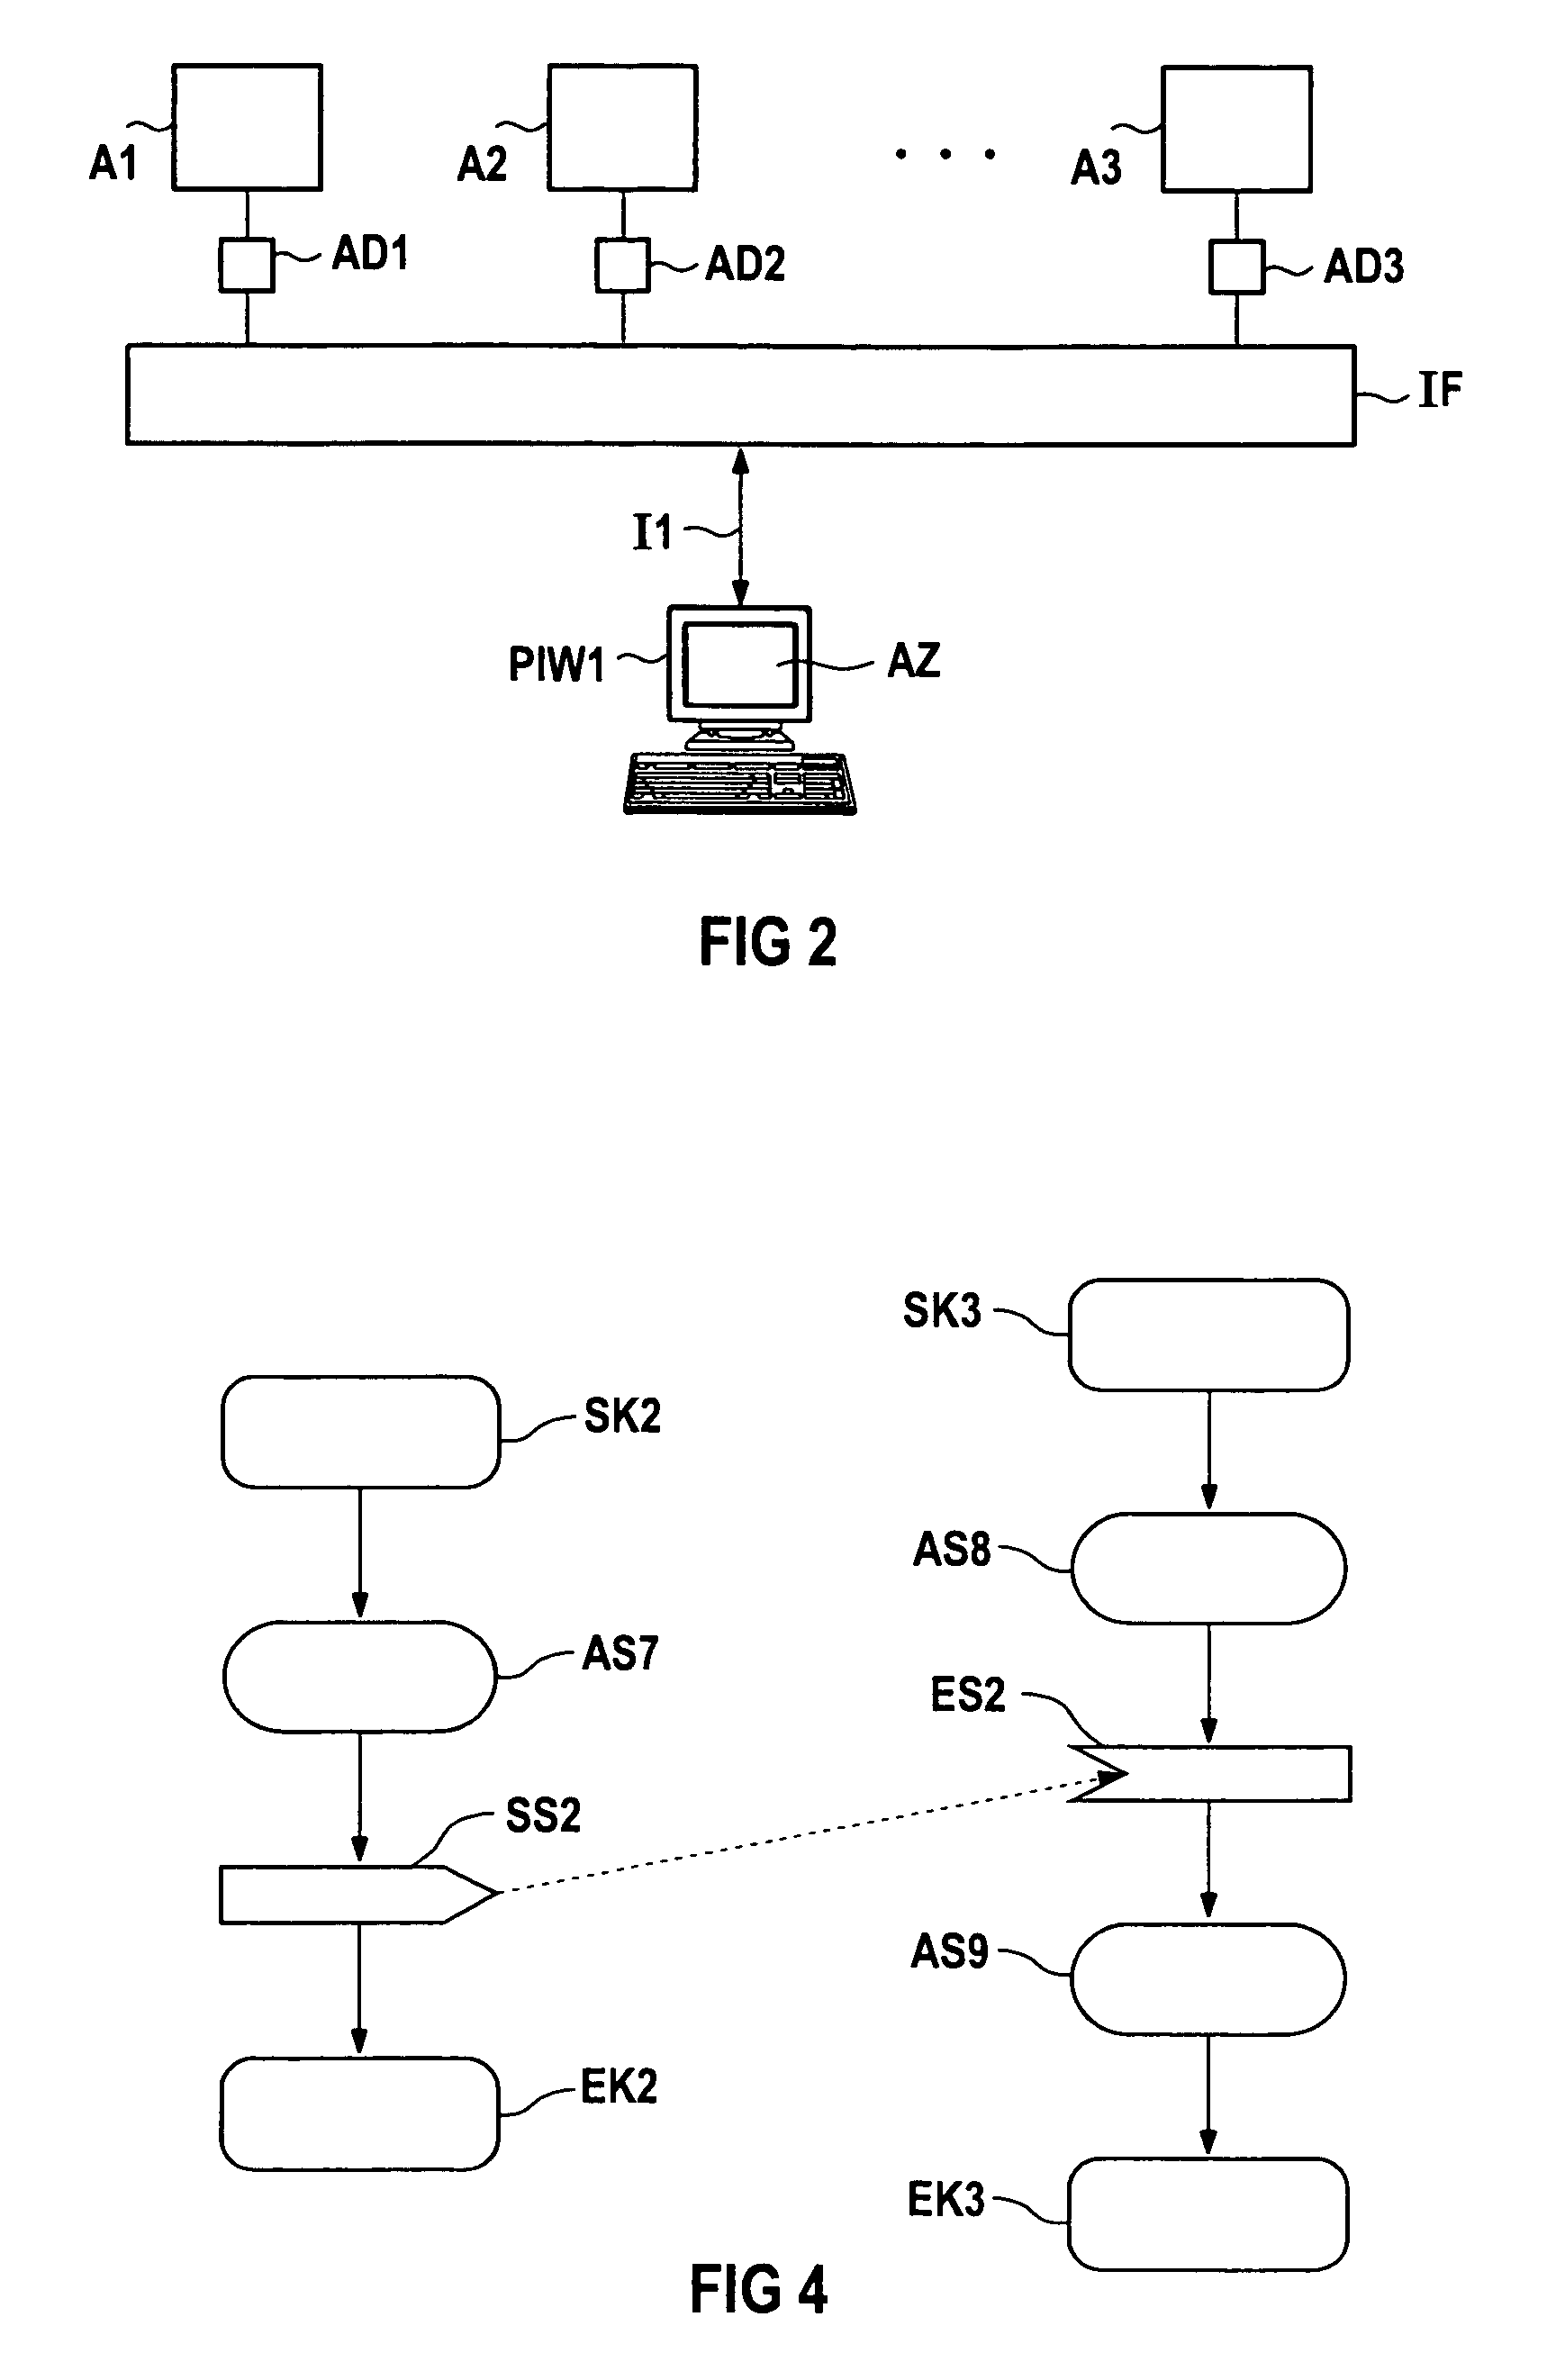 System and method for testing and/or debugging runtime systems for solving MES (manufacturing execution system) problems